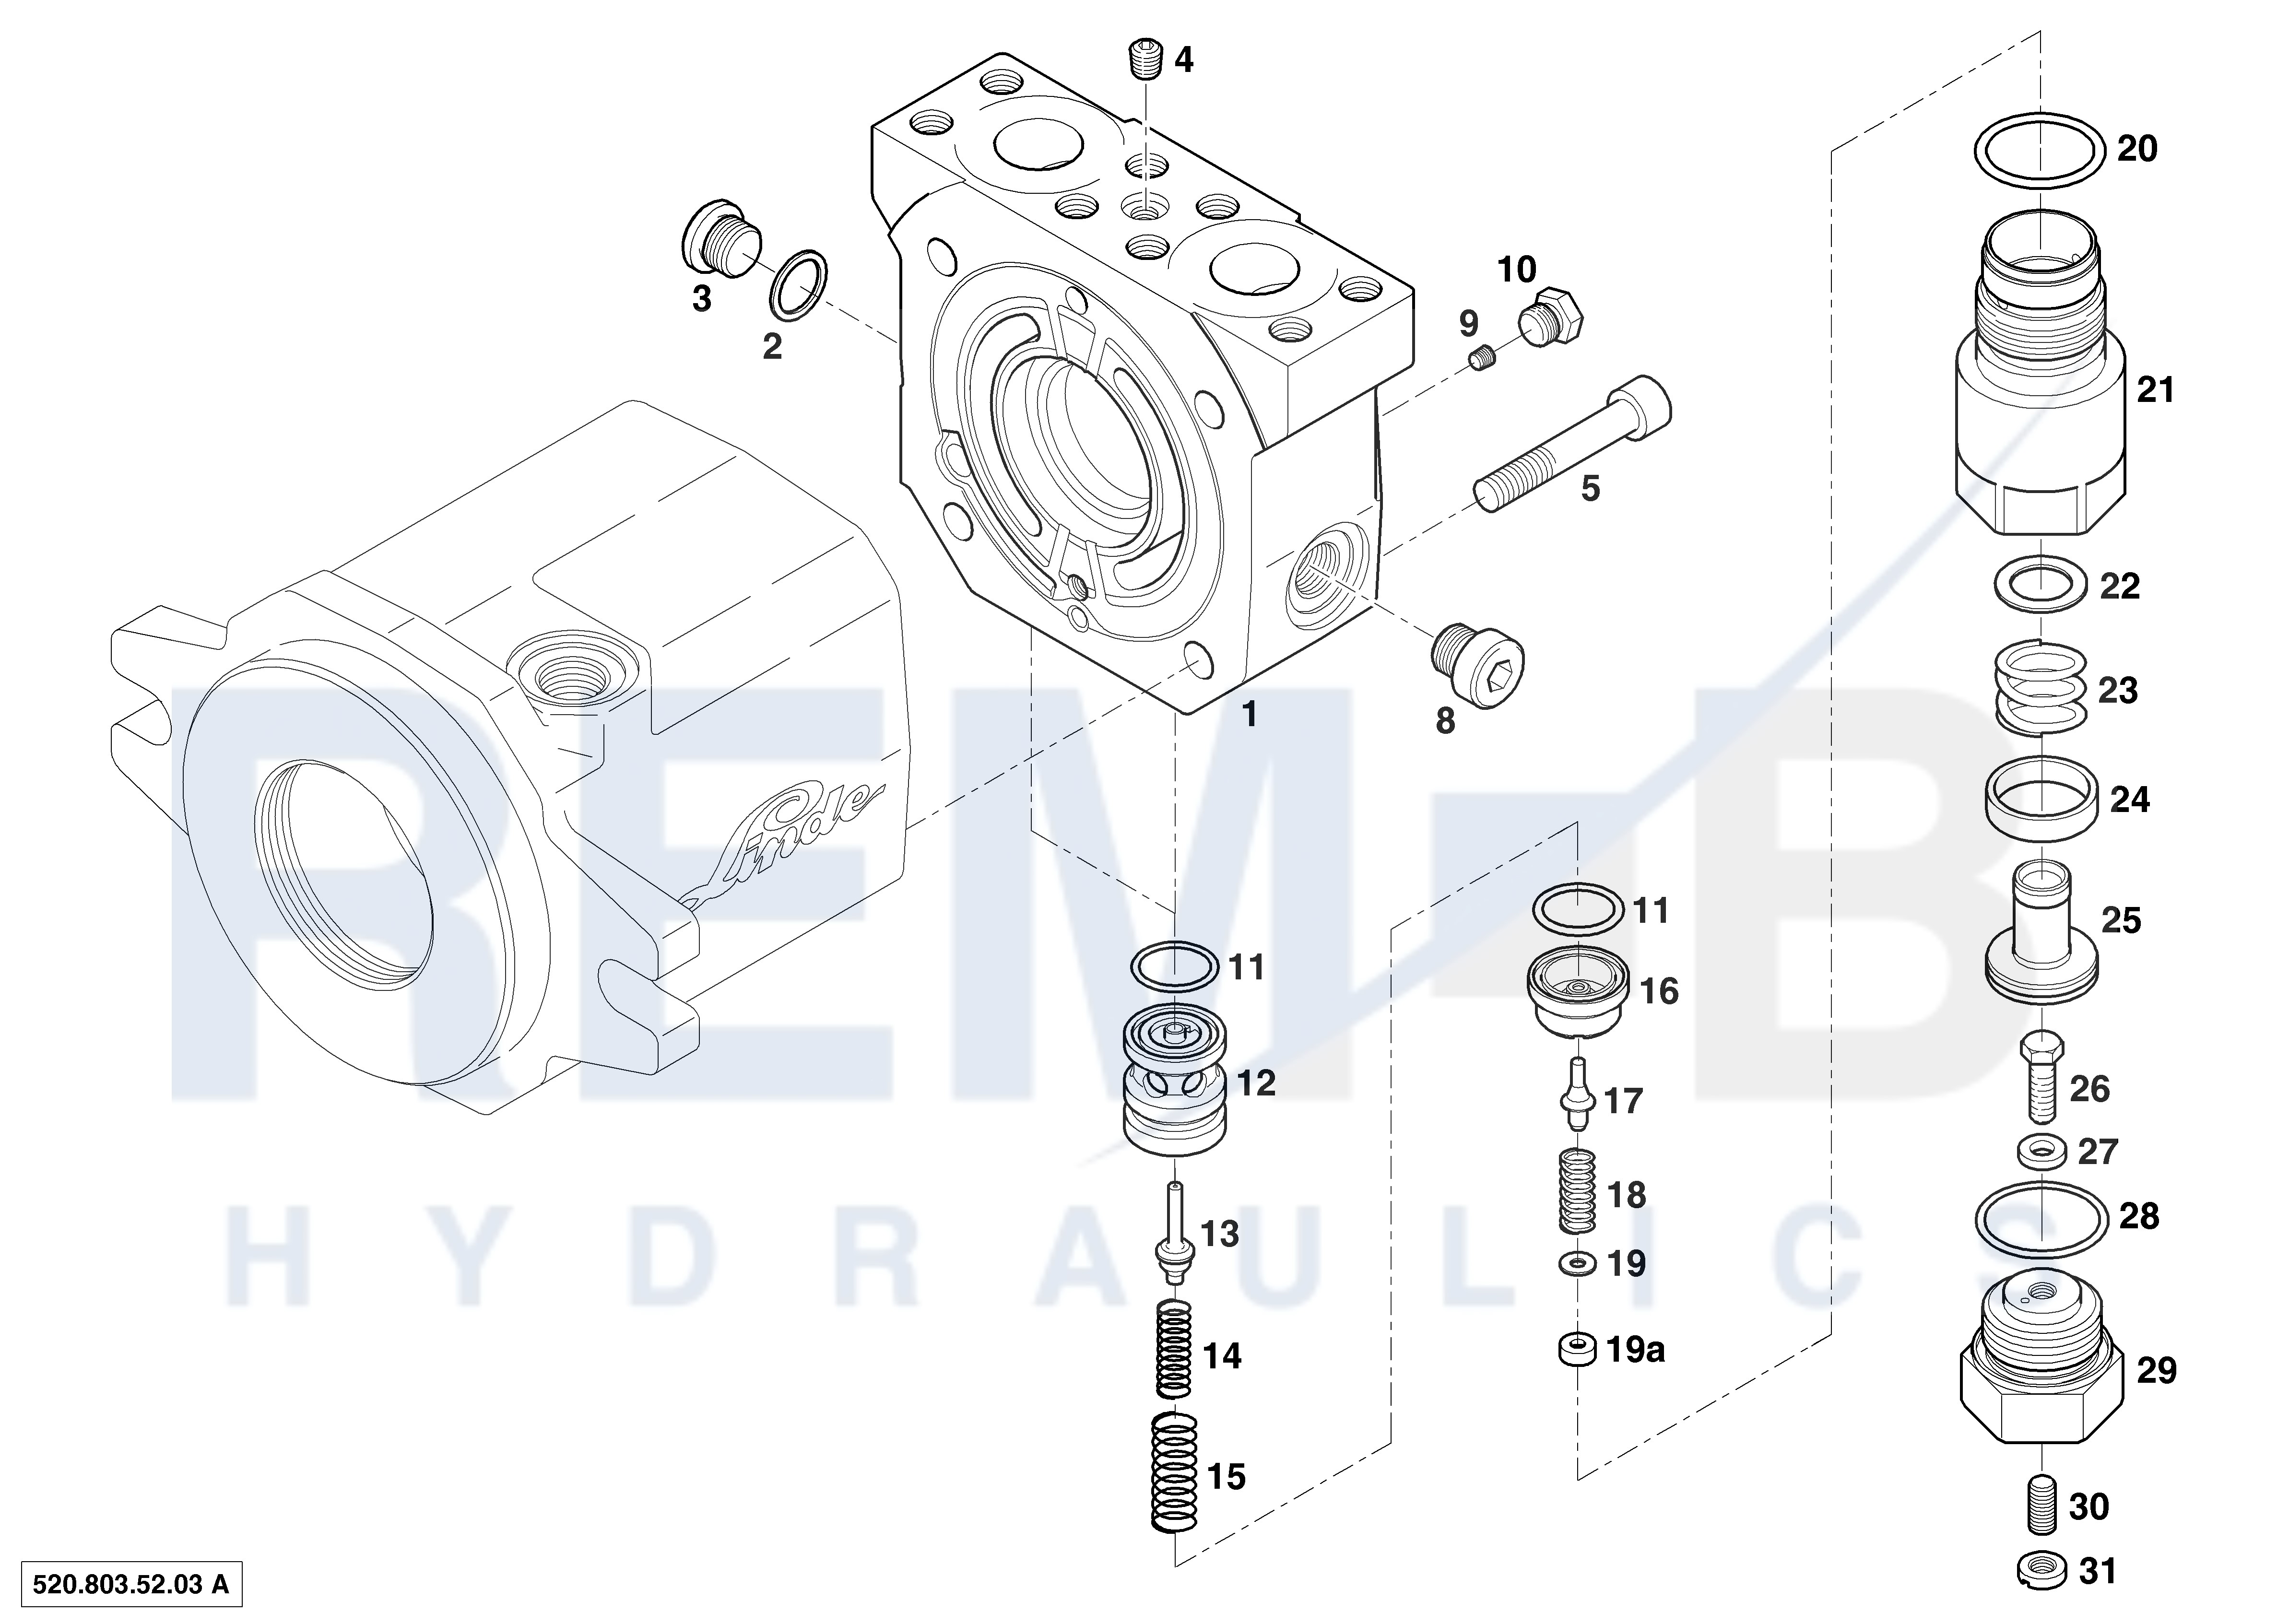 REAR COVER AND VD20-03 WITH PRESSURE CONTROL (UNF)